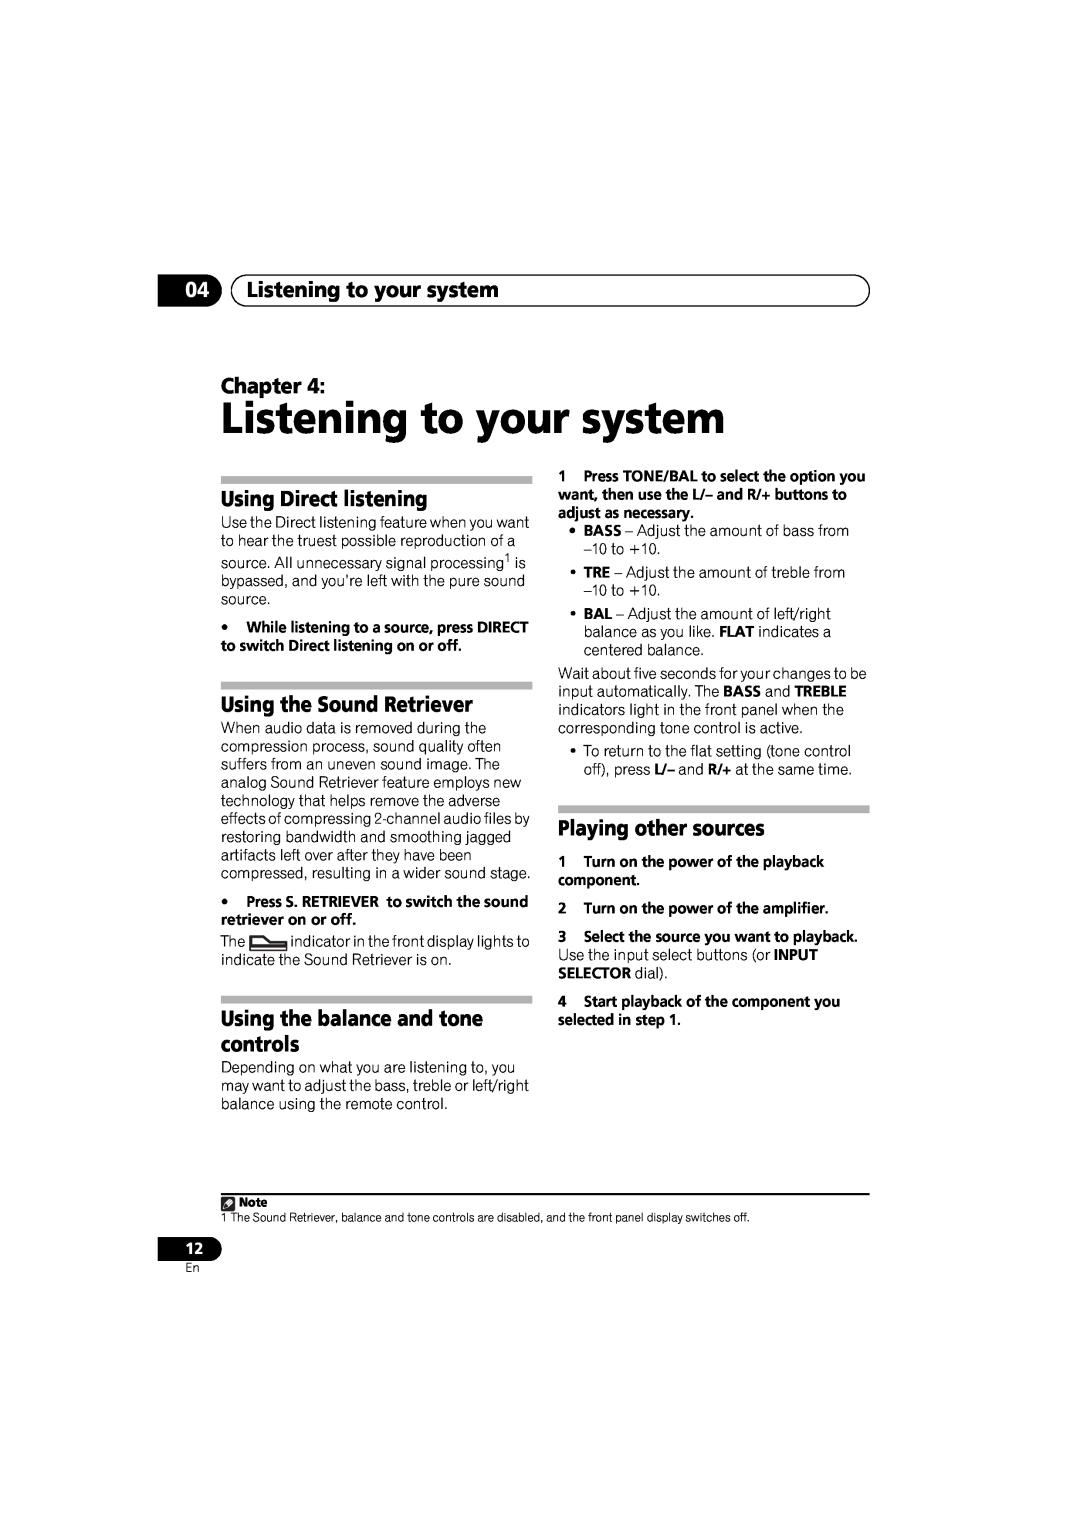 Pioneer A-A9-J manual 04Listening to your system Chapter, Using Direct listening, Using the Sound Retriever 